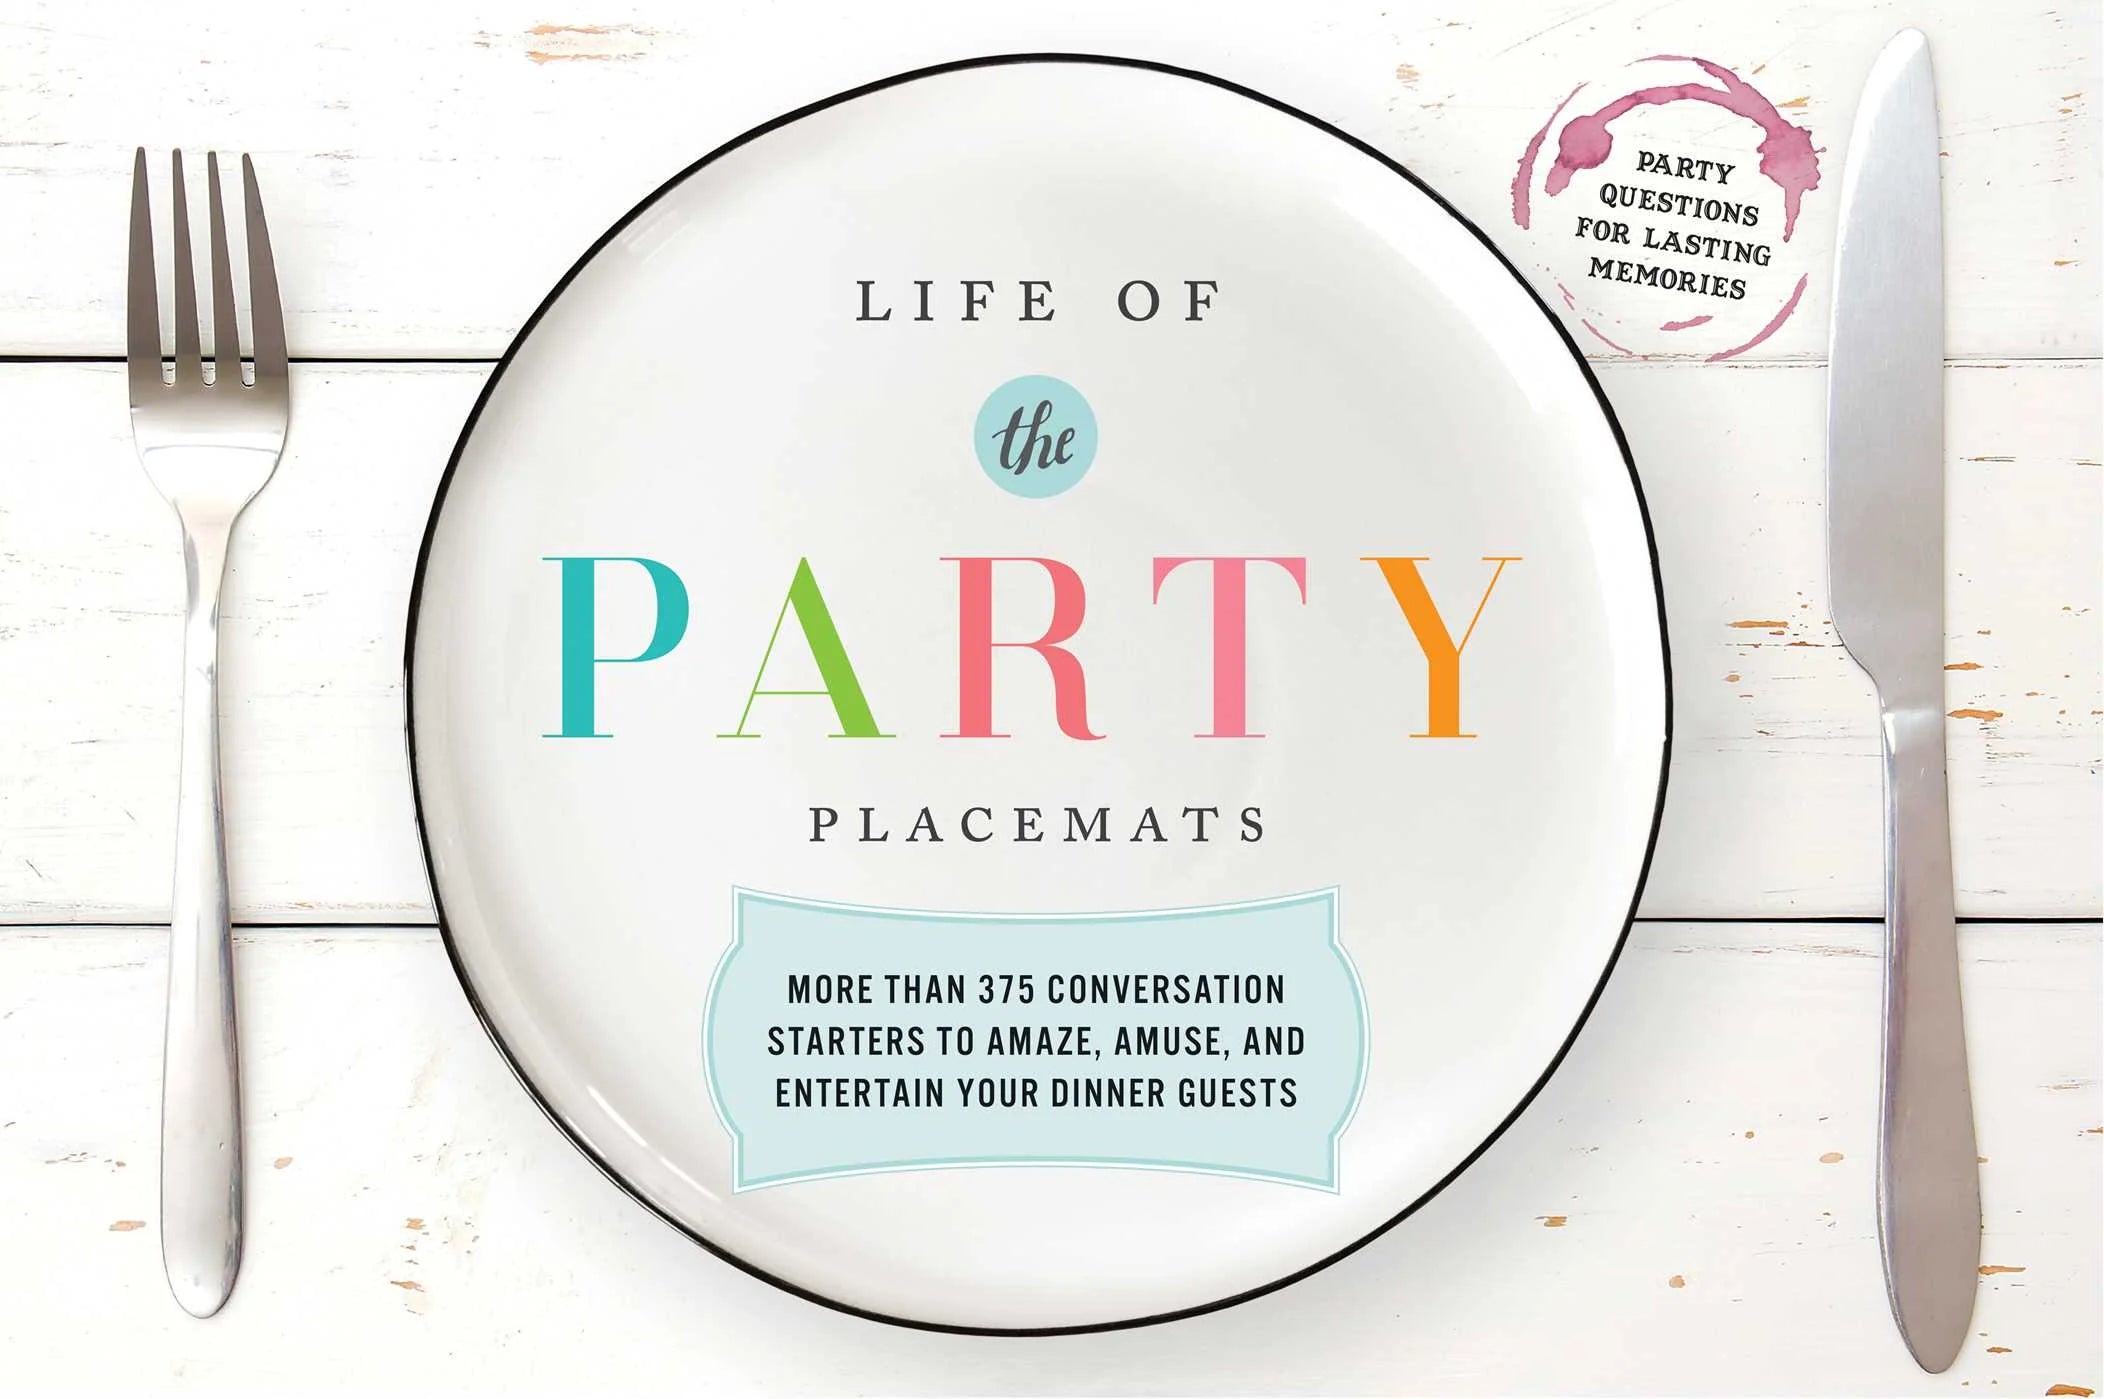 Life of the Party Placemats